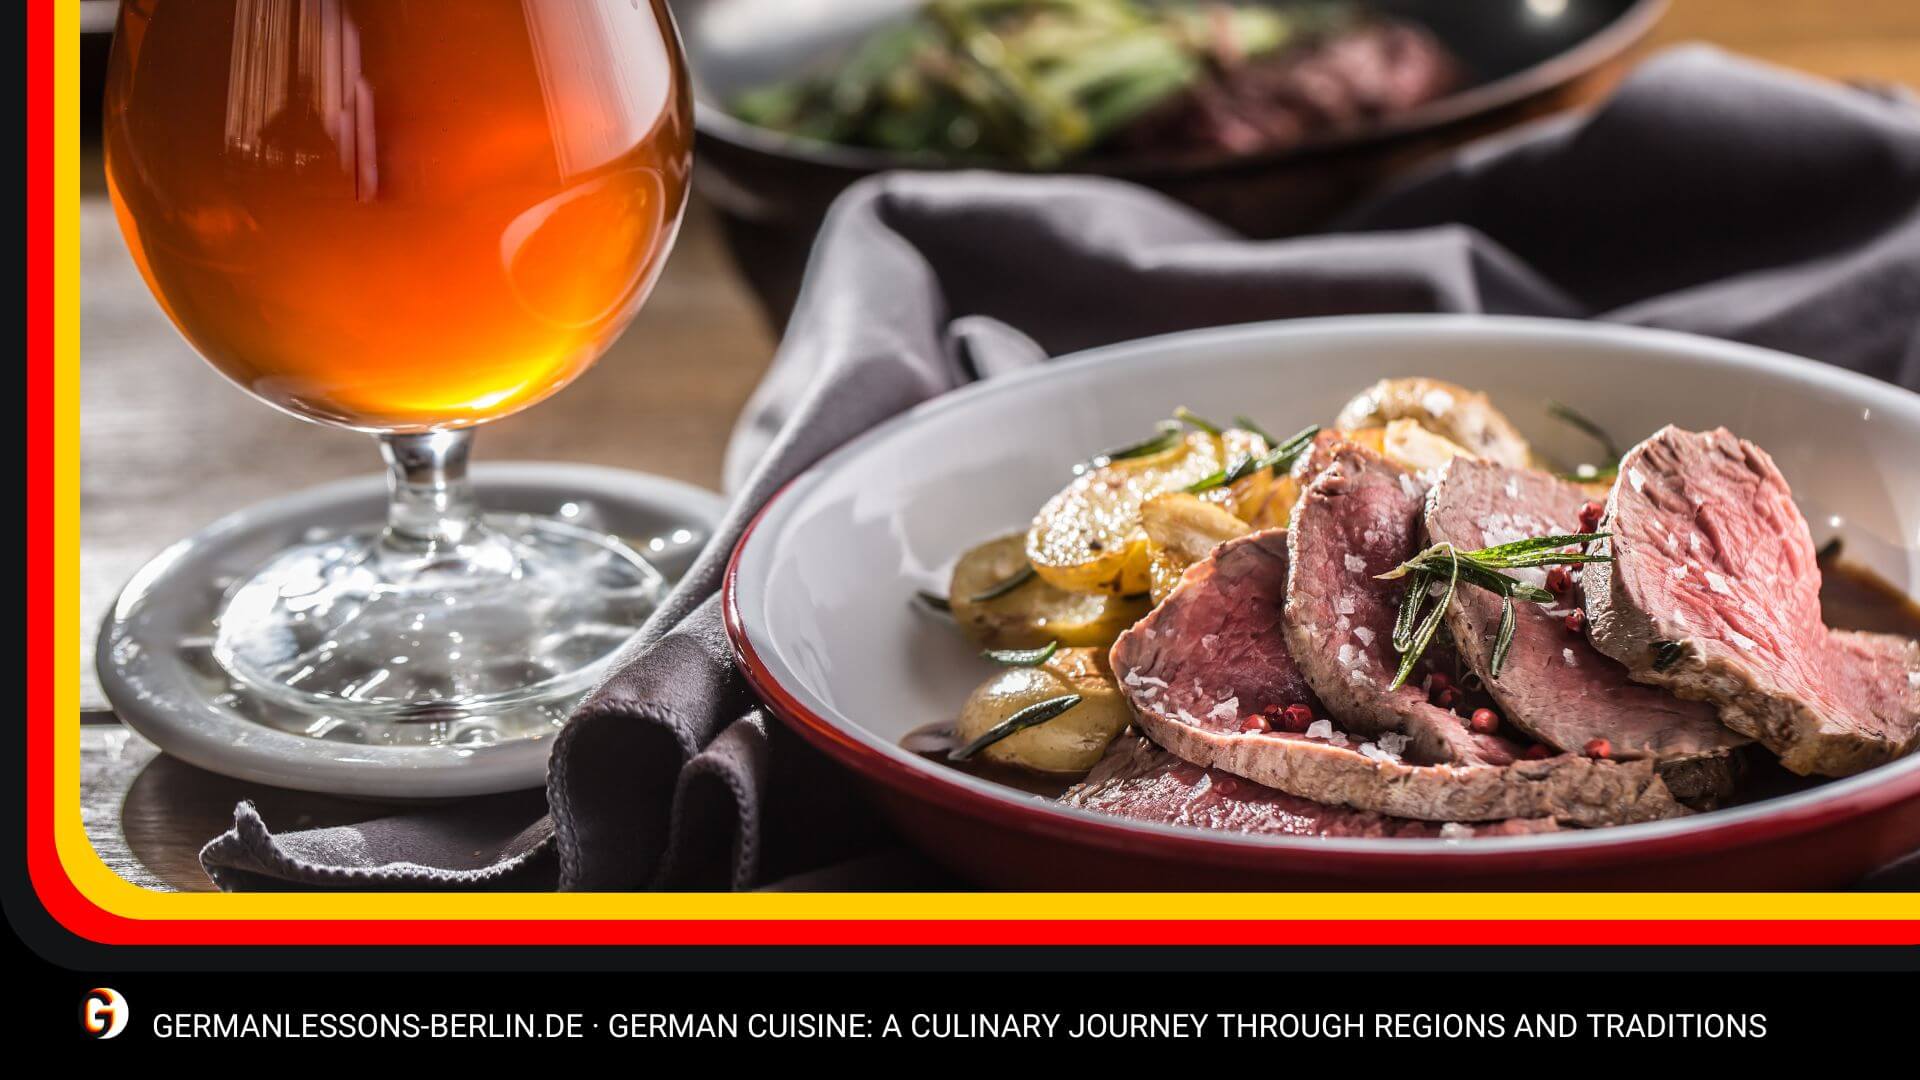 German Cuisine: A Culinary Journey Through Regions and Traditions